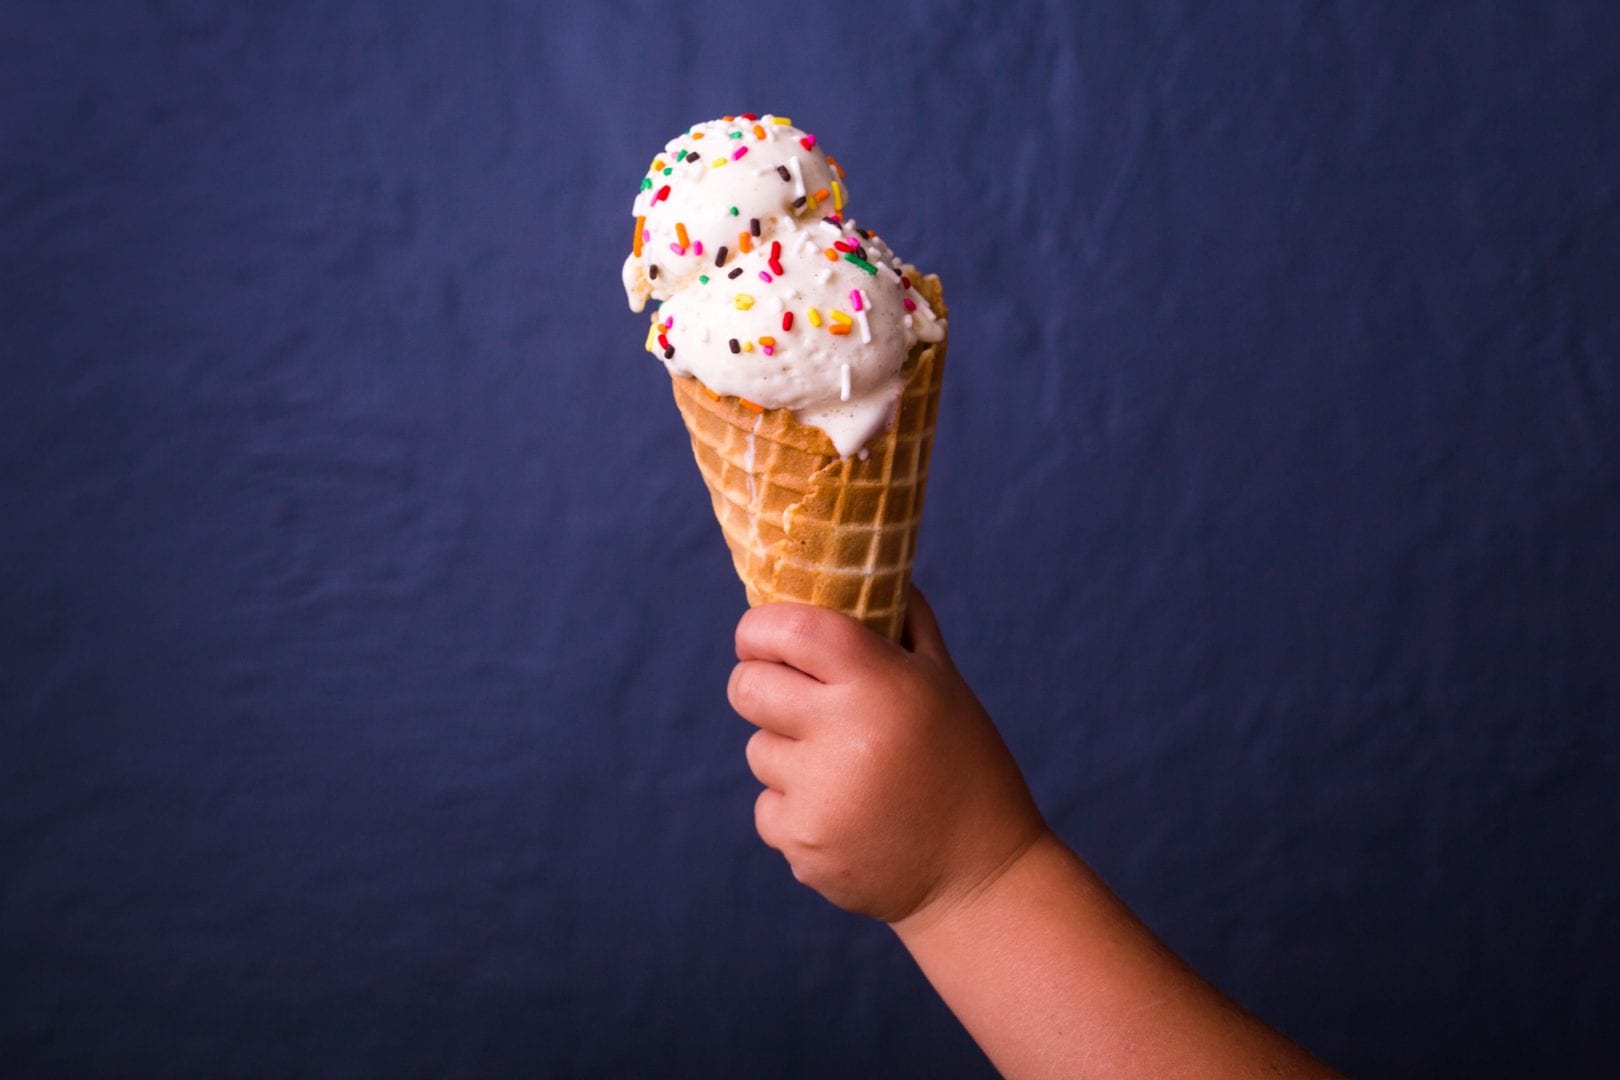 A child's hand holding an ice cream cone with two large scoops of ice cream on it.